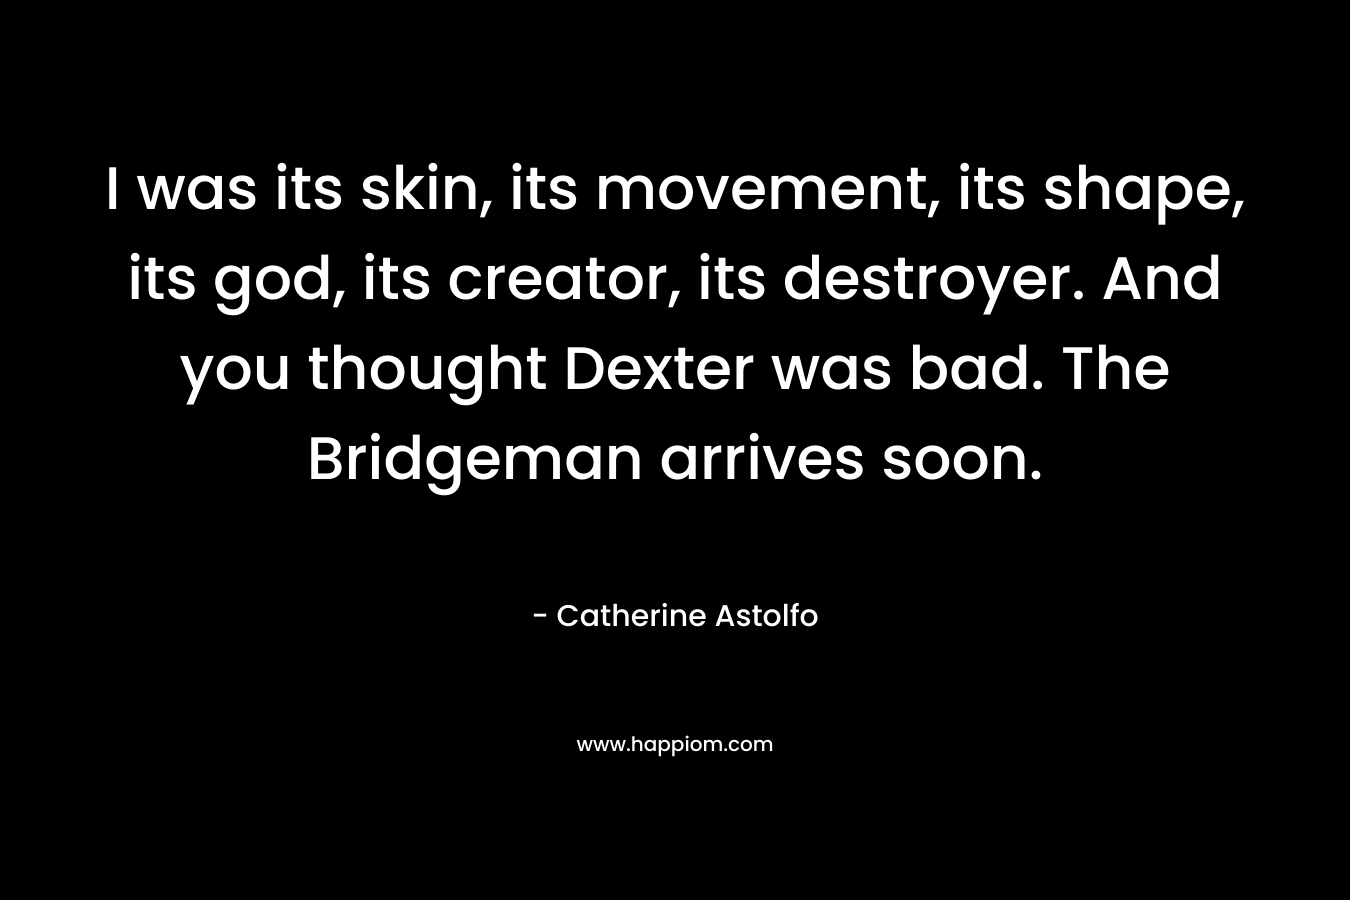 I was its skin, its movement, its shape, its god, its creator, its destroyer. And you thought Dexter was bad. The Bridgeman arrives soon.